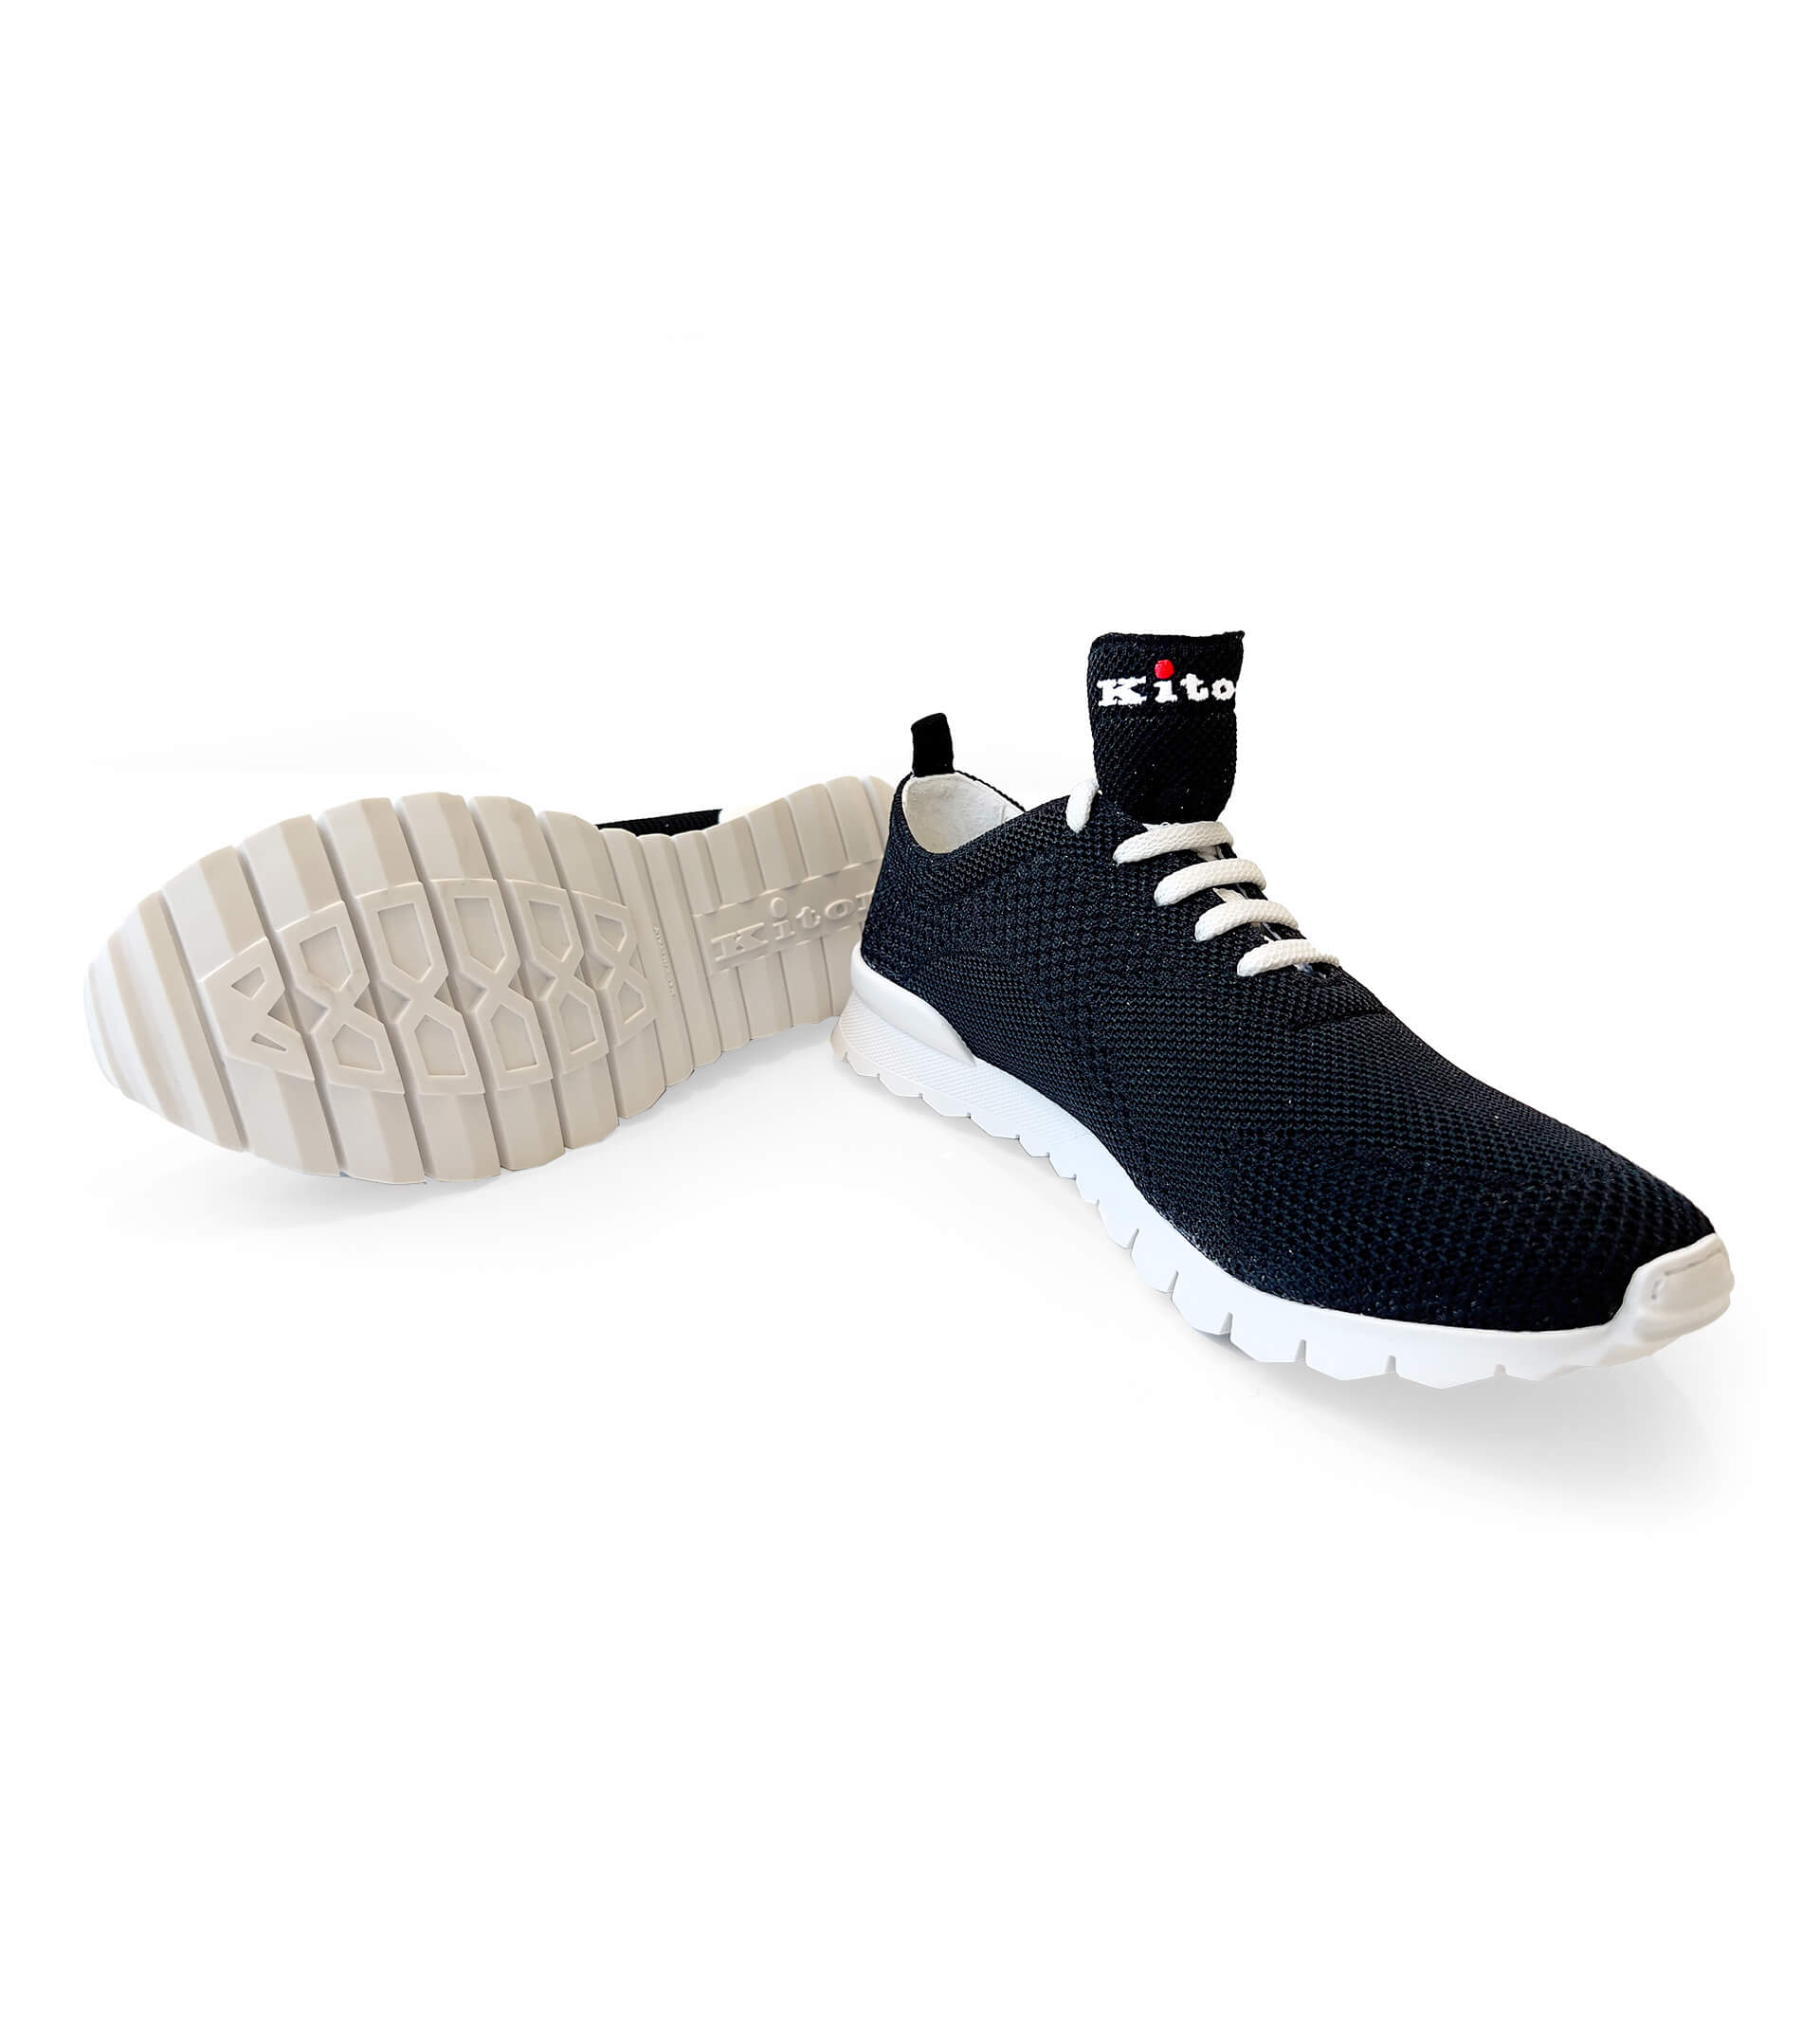 KITON Sneaker Knit Lace-Up, in Black